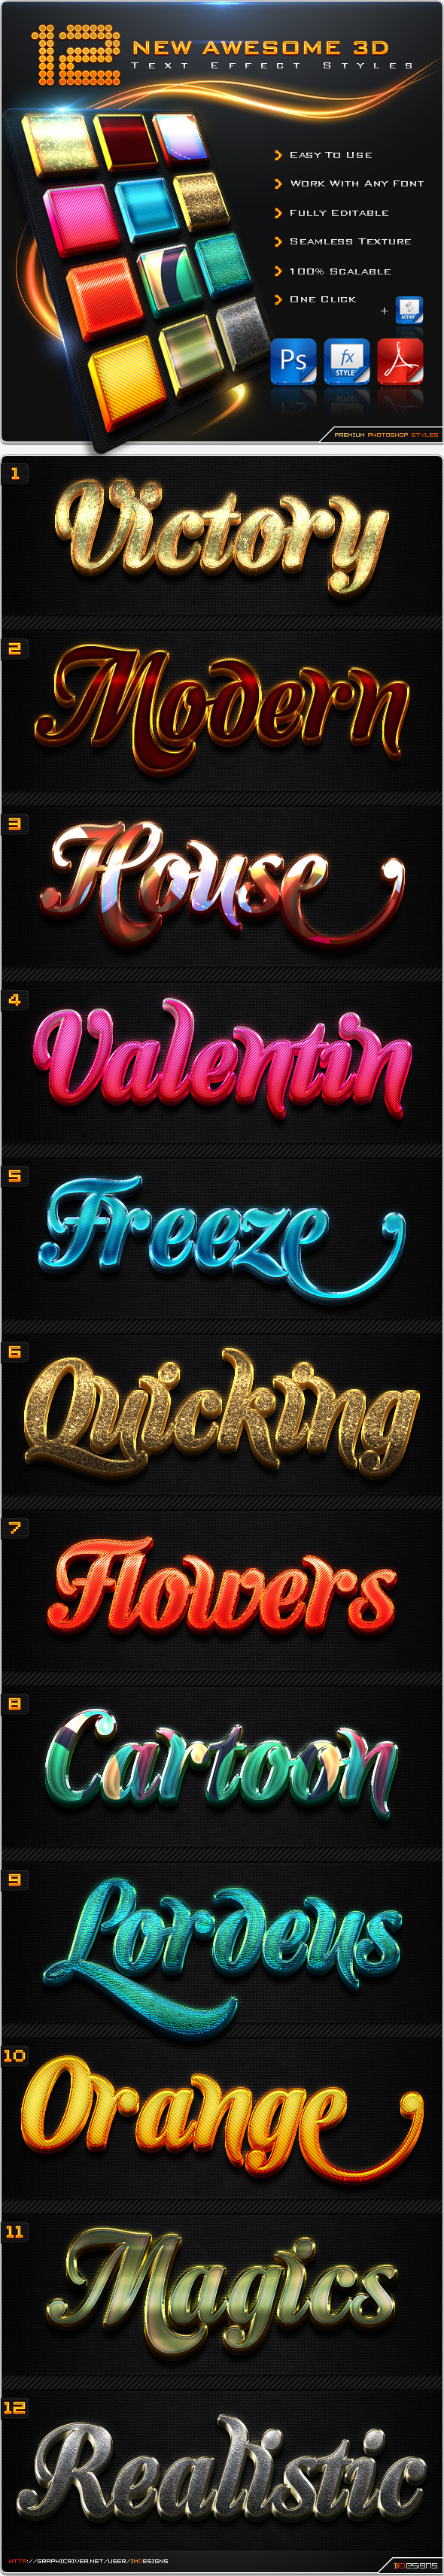 12 New 3D Text Effect Styles + Actions